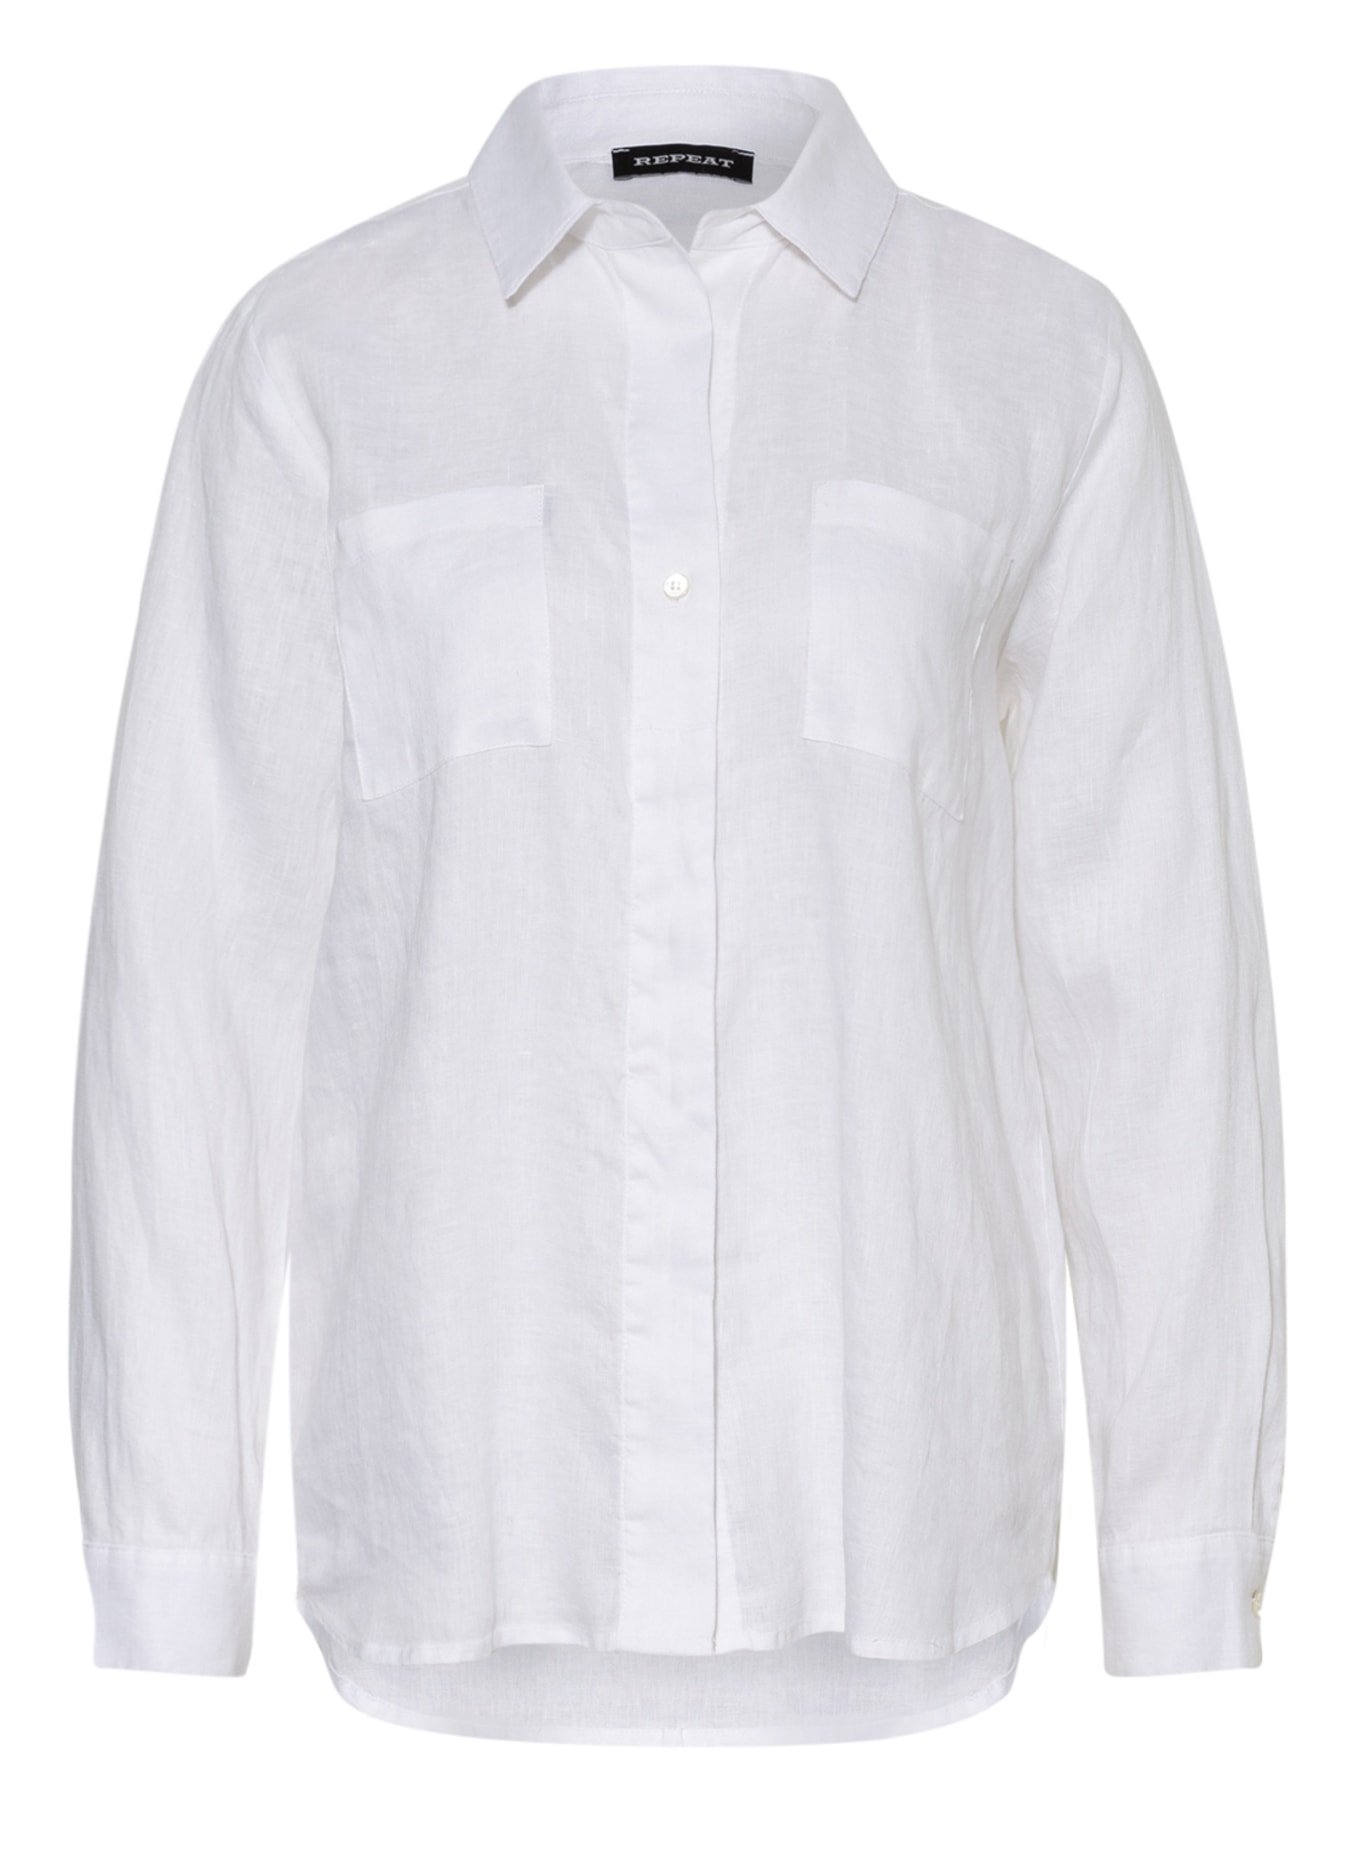 REPEAT Shirt blouse made of linen, Color: WHITE (Image 1)